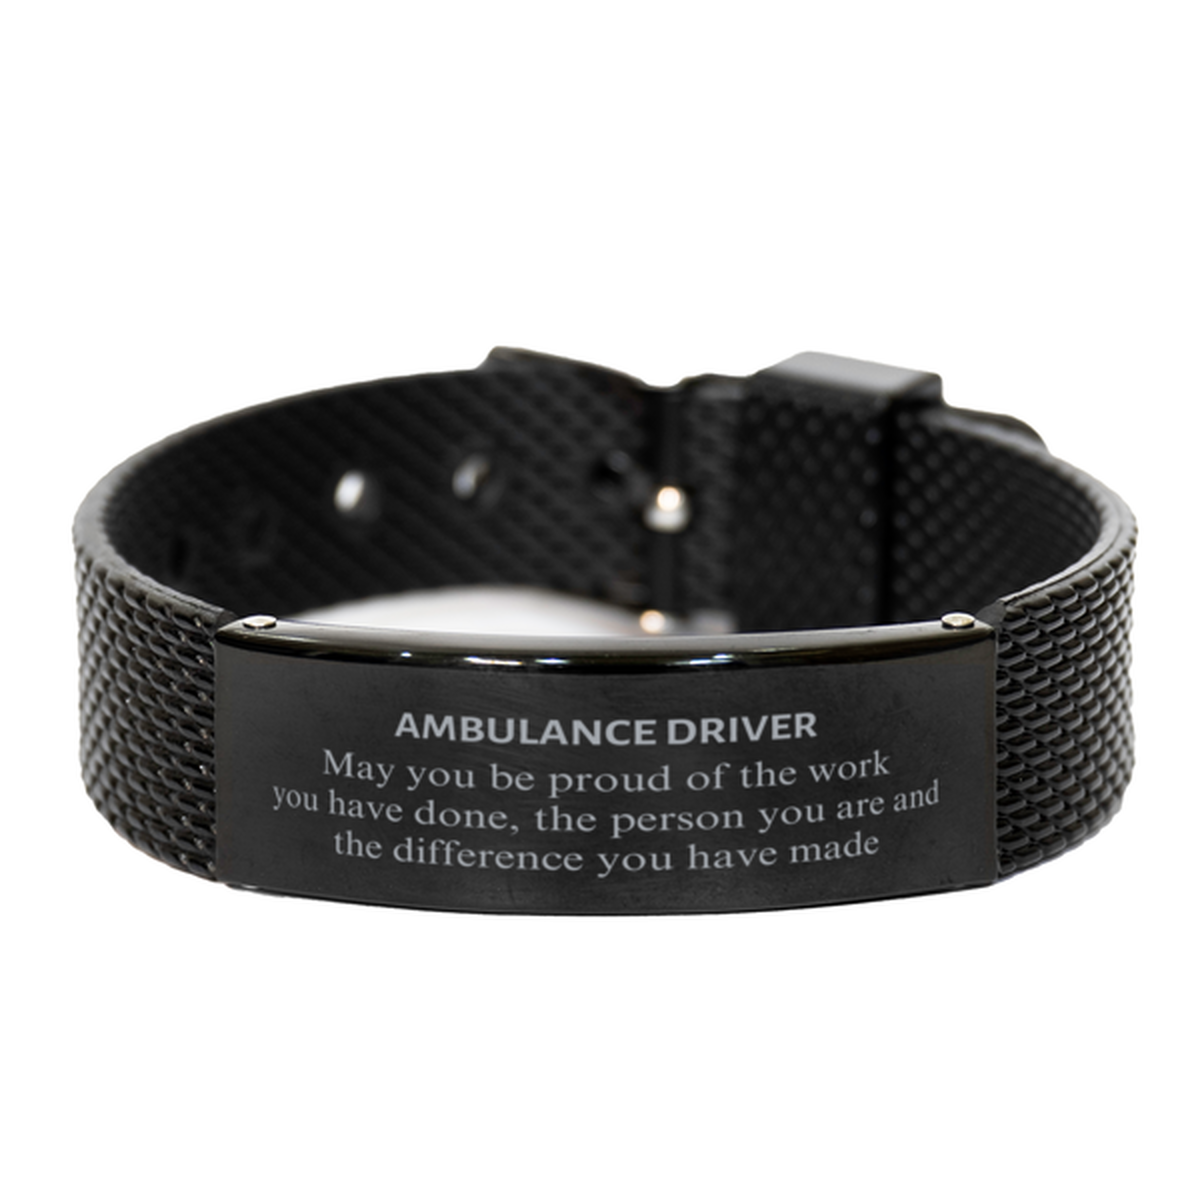 Ambulance Driver May you be proud of the work you have done, Retirement Ambulance Driver Black Shark Mesh Bracelet for Colleague Appreciation Gifts Amazing for Ambulance Driver